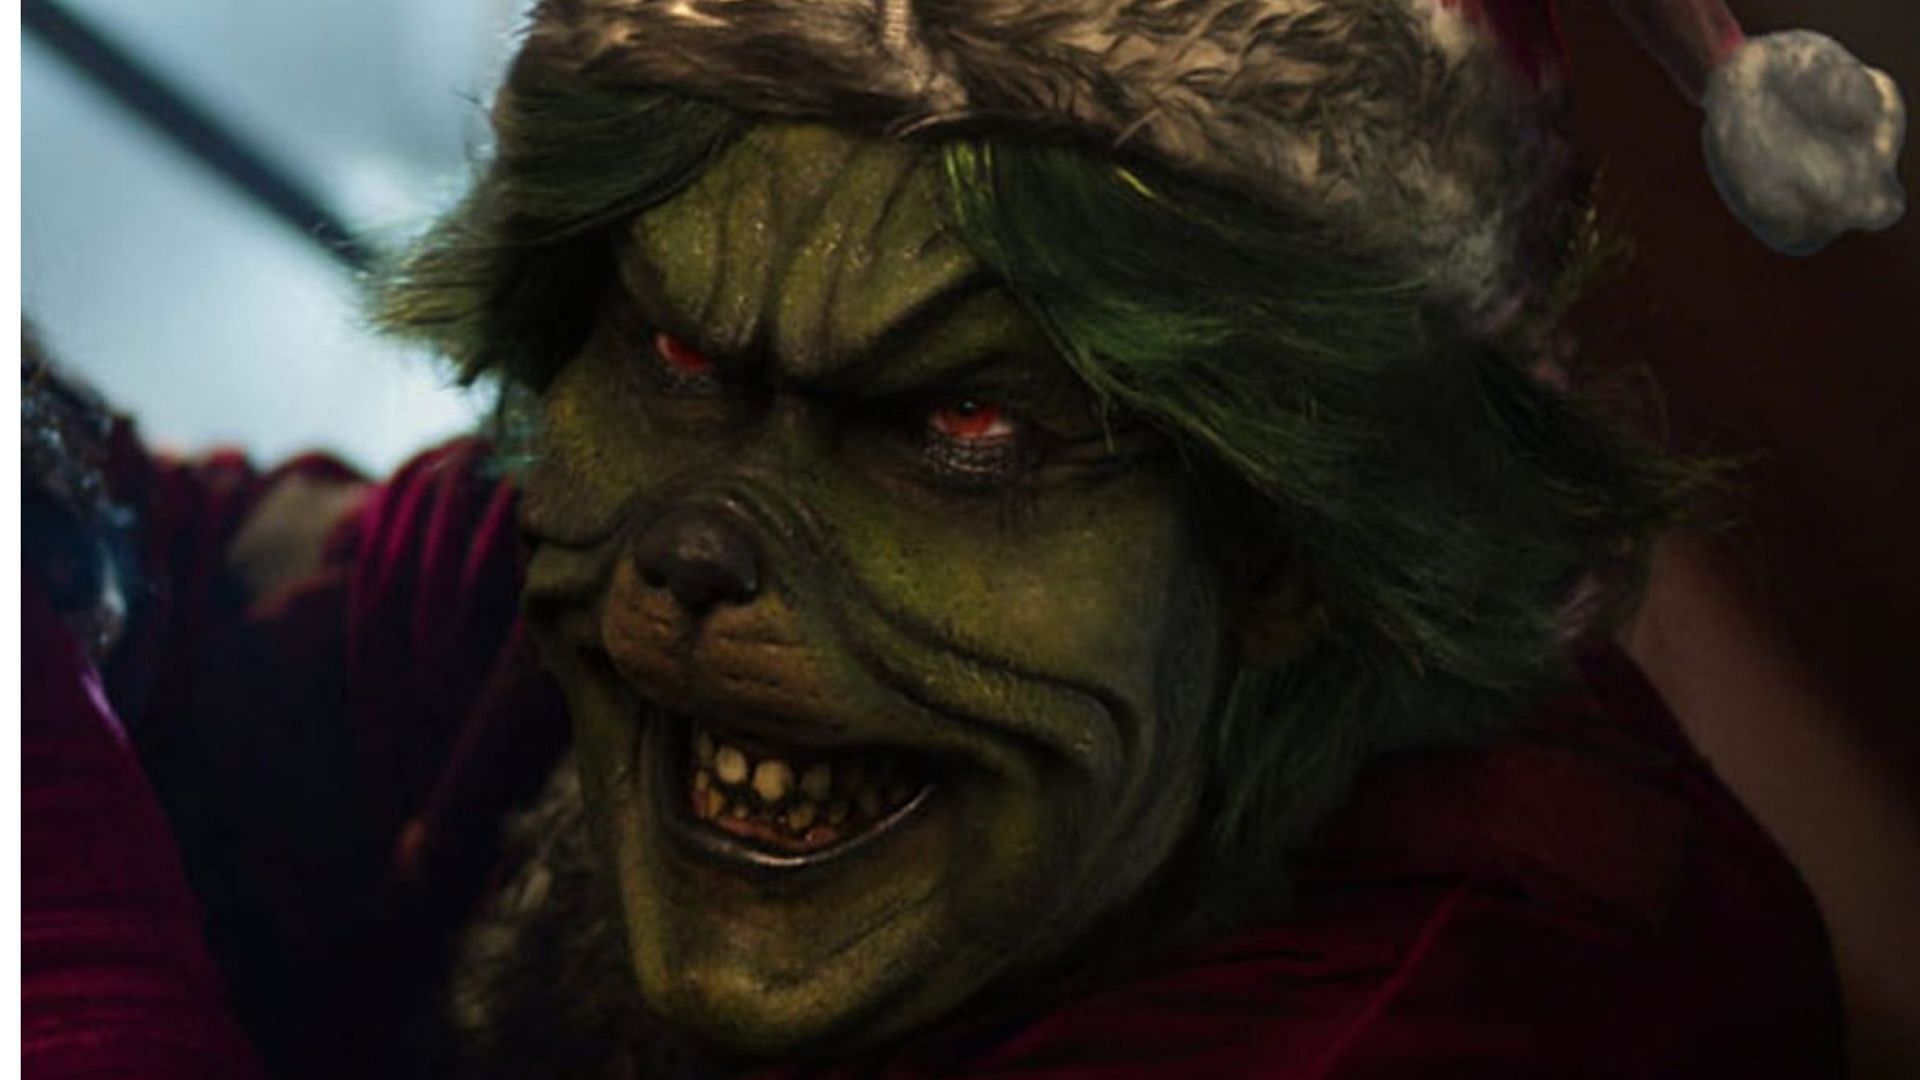 A still from the new Grinch horror movie (Image via @crybabyfuell/Twitter)